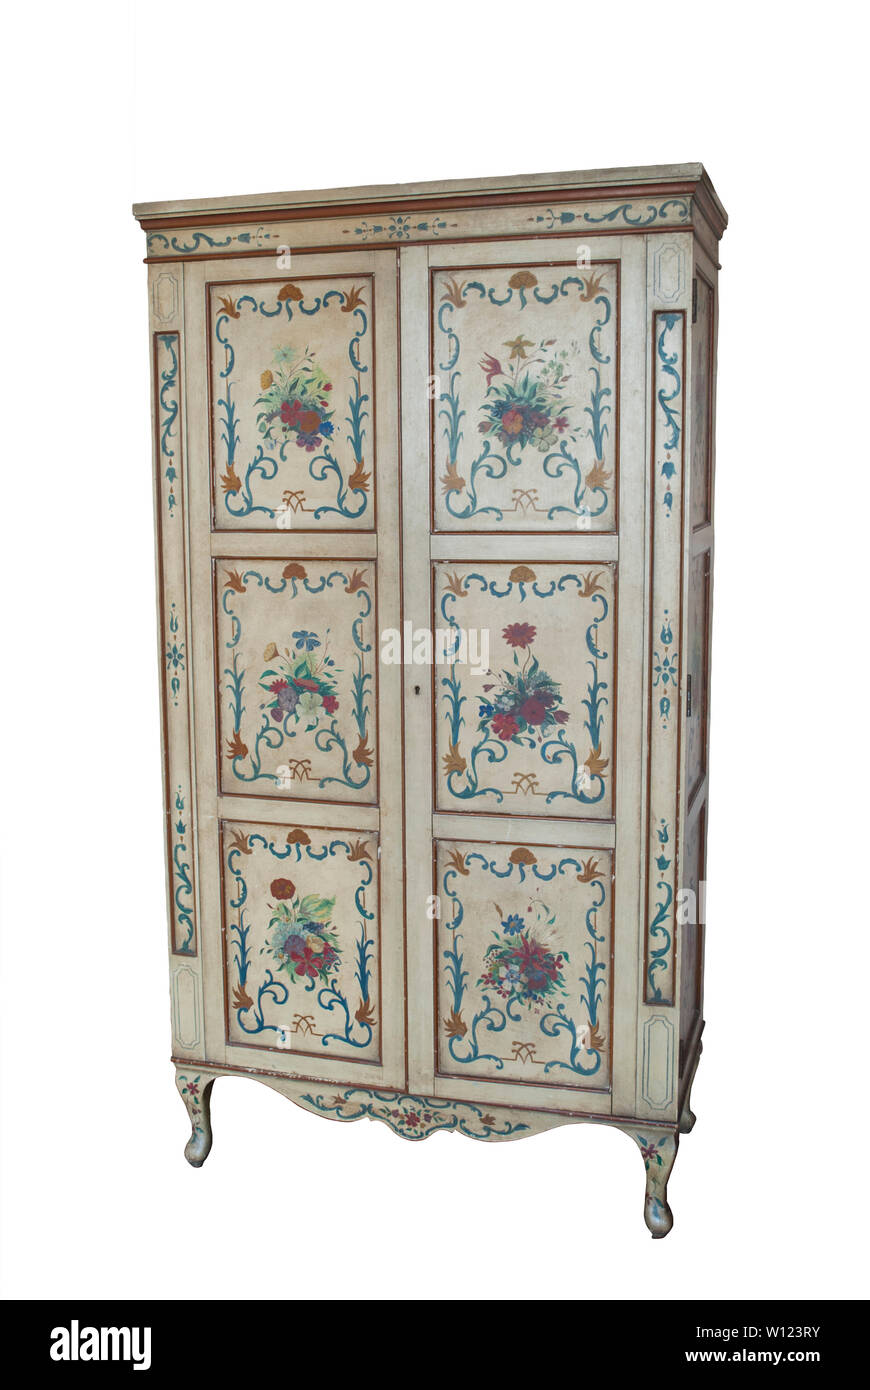 Antique Wardrobe Handmade Painted Piece Of Furniture Old French